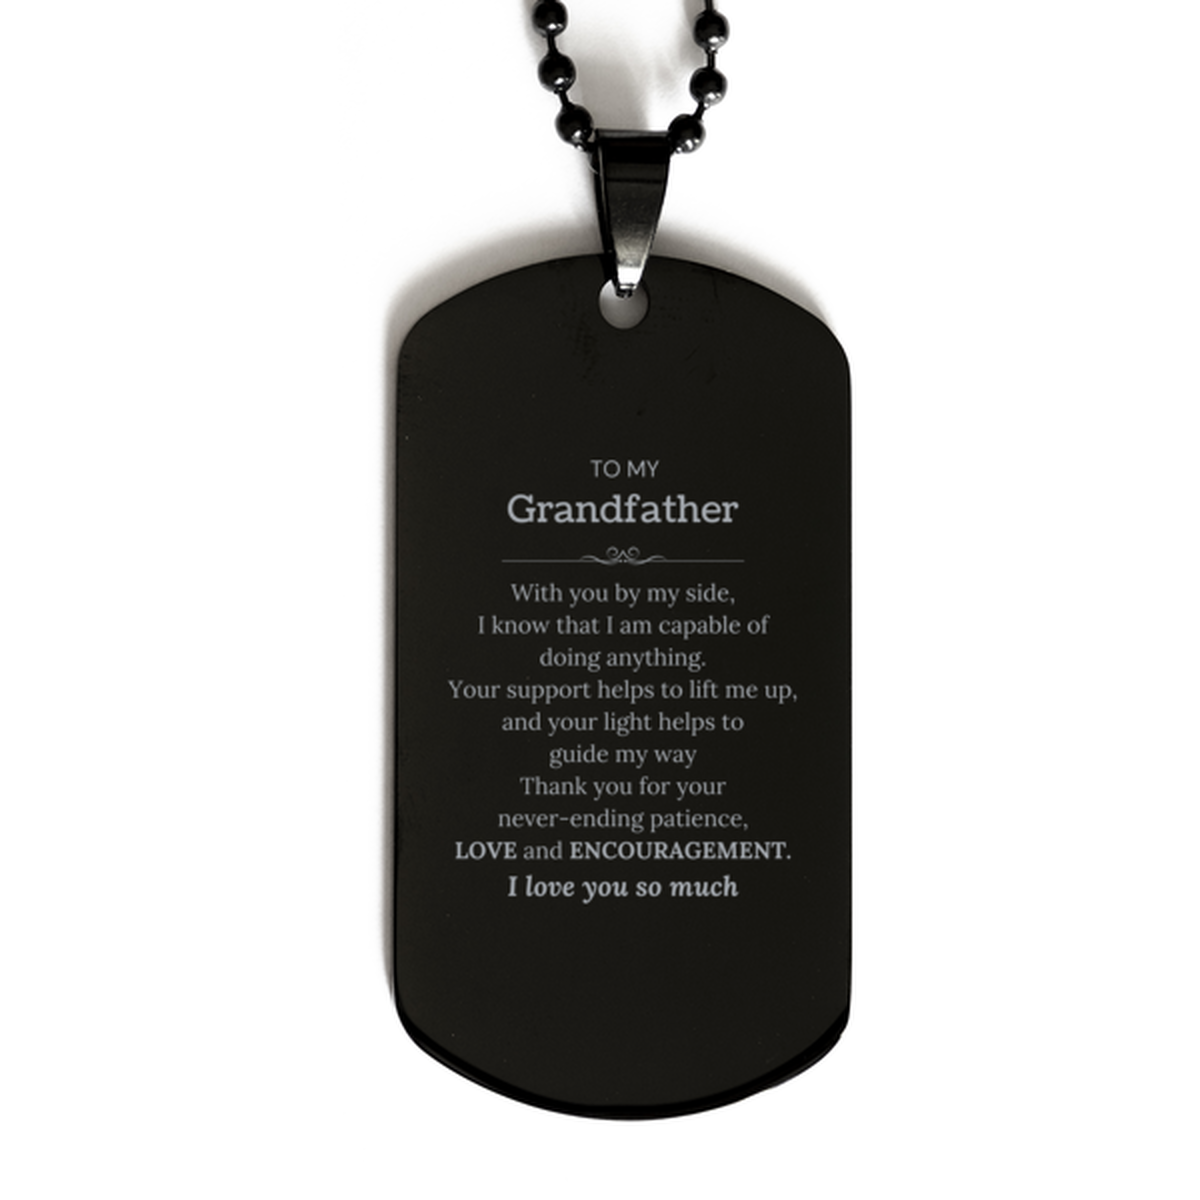 Appreciation Grandfather Black Dog Tag Gifts, To My Grandfather Birthday Christmas Wedding Keepsake Gifts for Grandfather With you by my side, I know that I am capable of doing anything. I love you so much